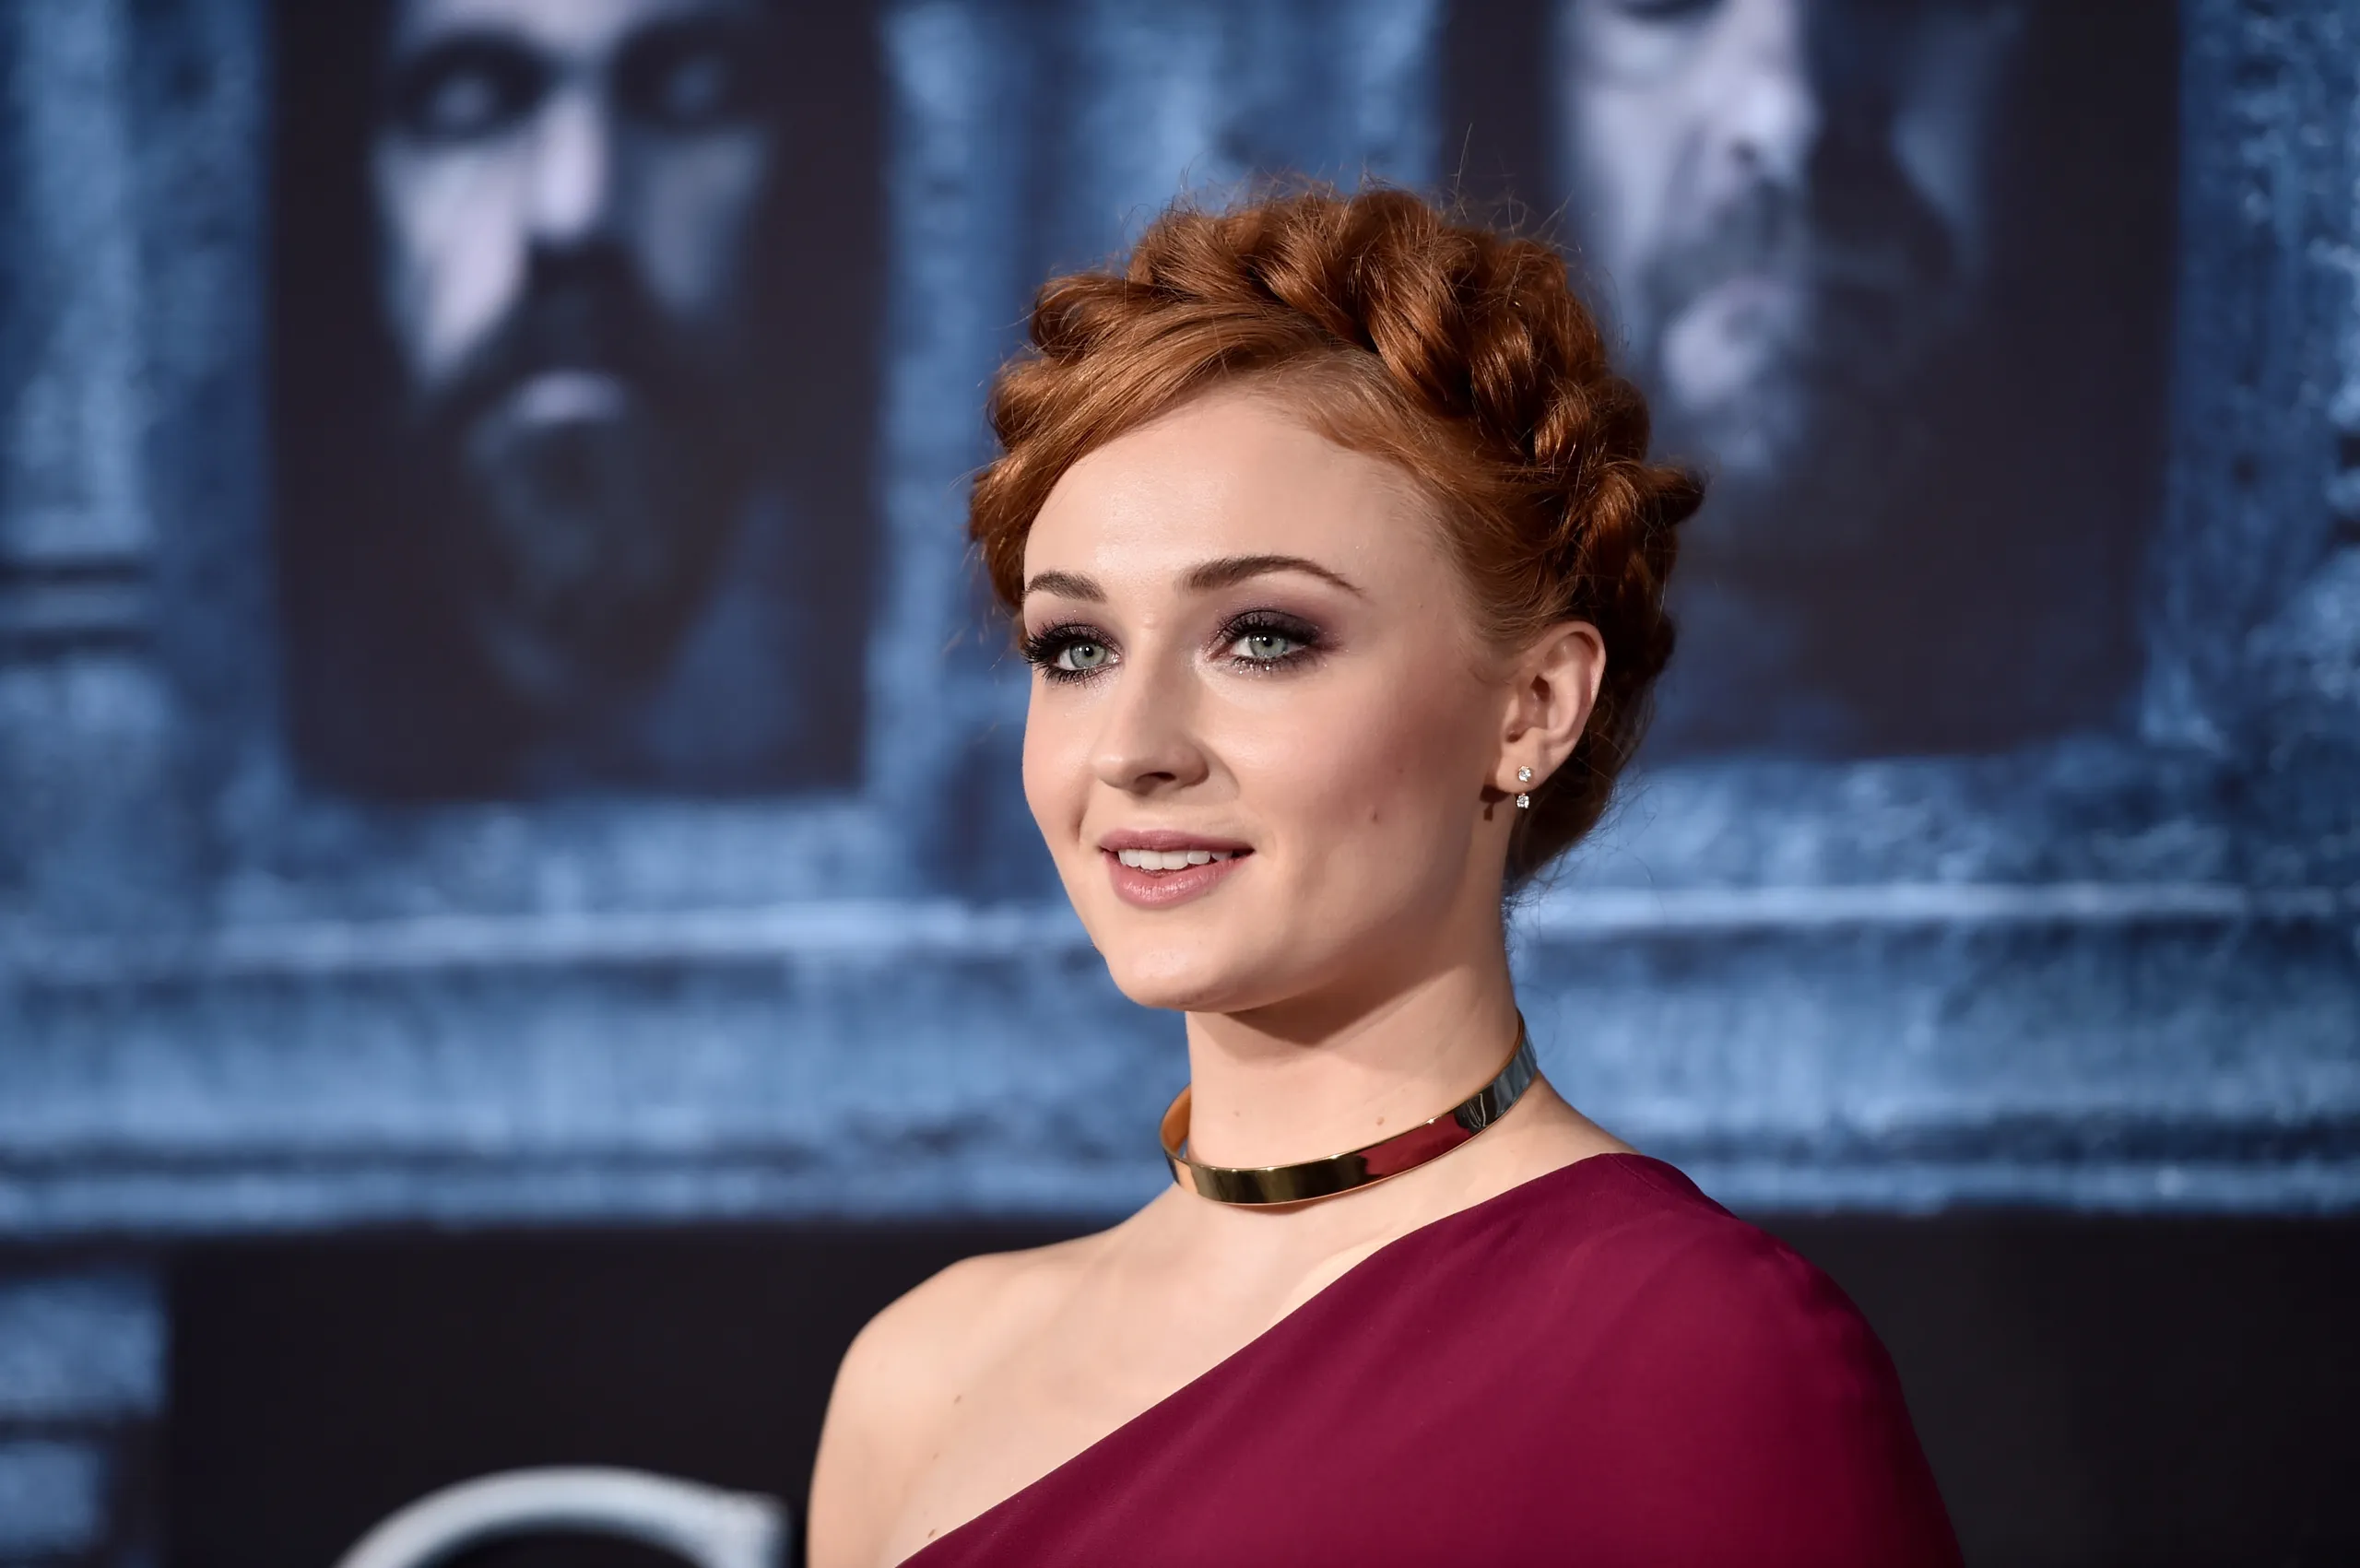 Game of Thrones actress, Sophie Turner sues husband over kids